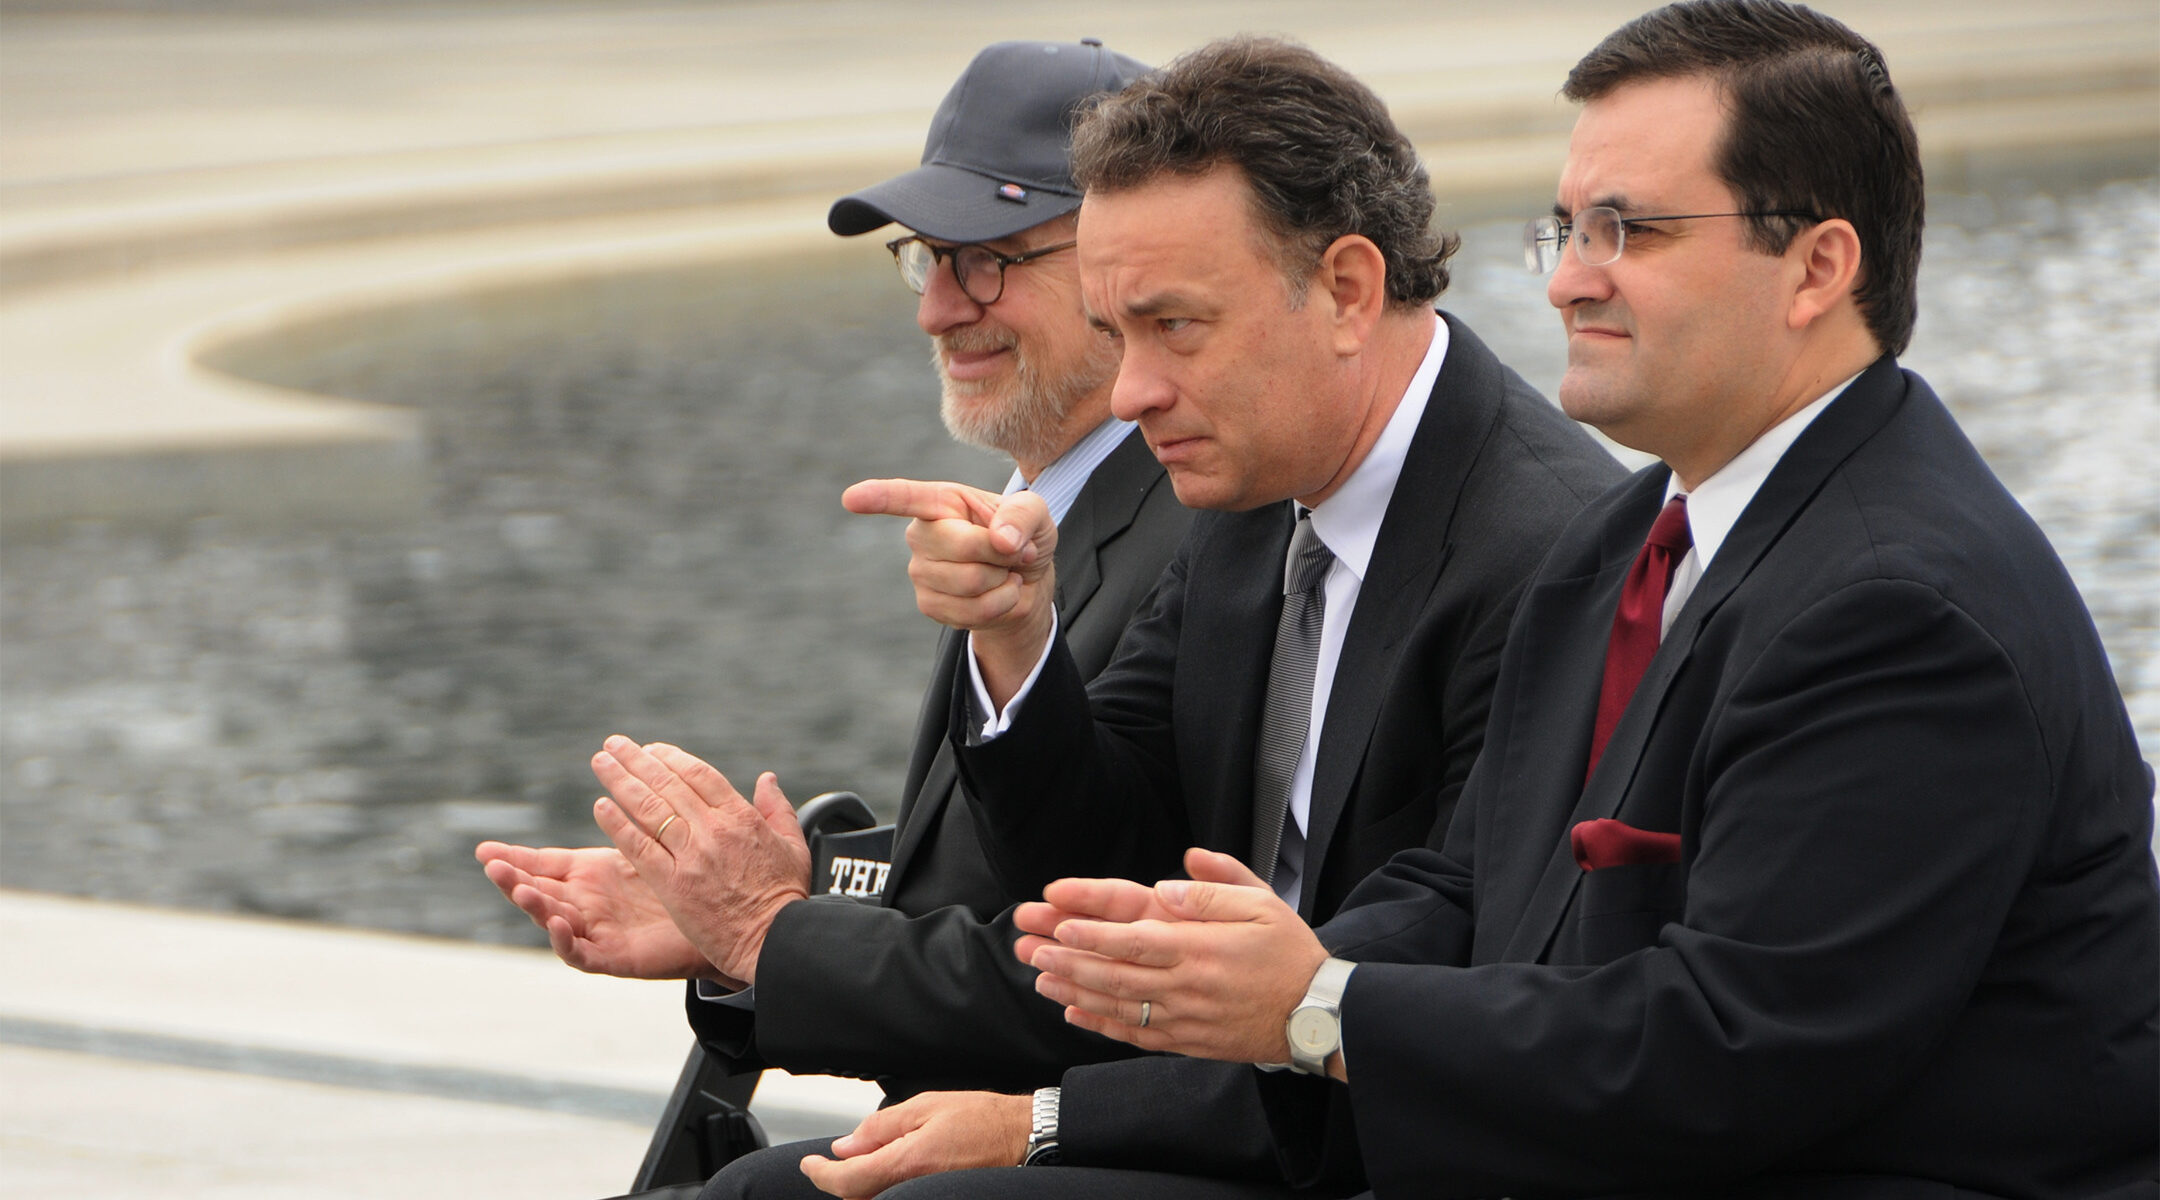 Actor Tom Hanks, center, points to veterans at the World War II Memorial in Washington, DC on March 11, 2010.(Wikimedia Commons)